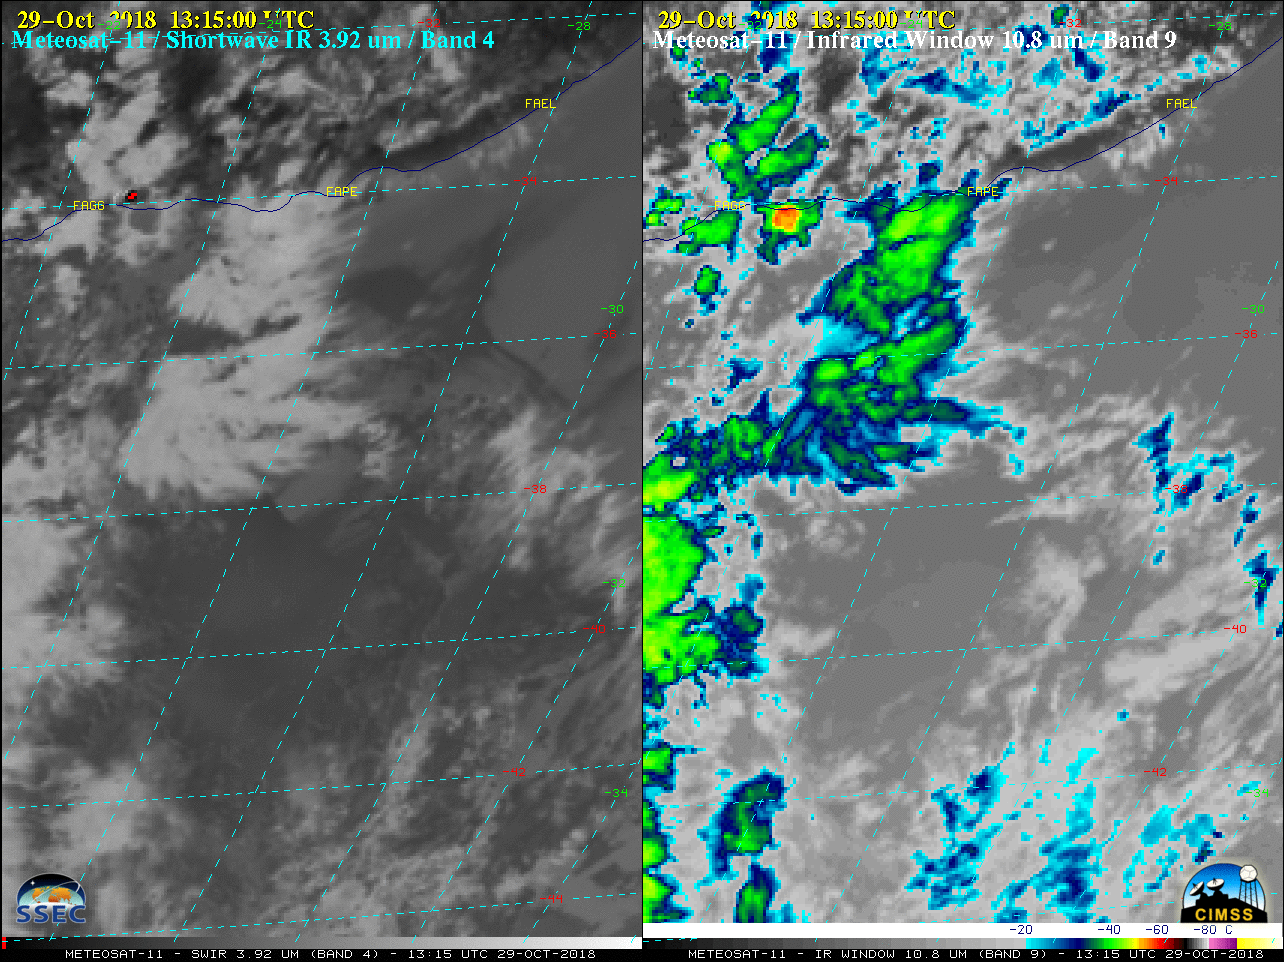 Meteosat-11 Shortwave Infrared (3.92 µm, left) and Longwave Infrared Window (10.8 µm, right) images [click to play animation | MP4]